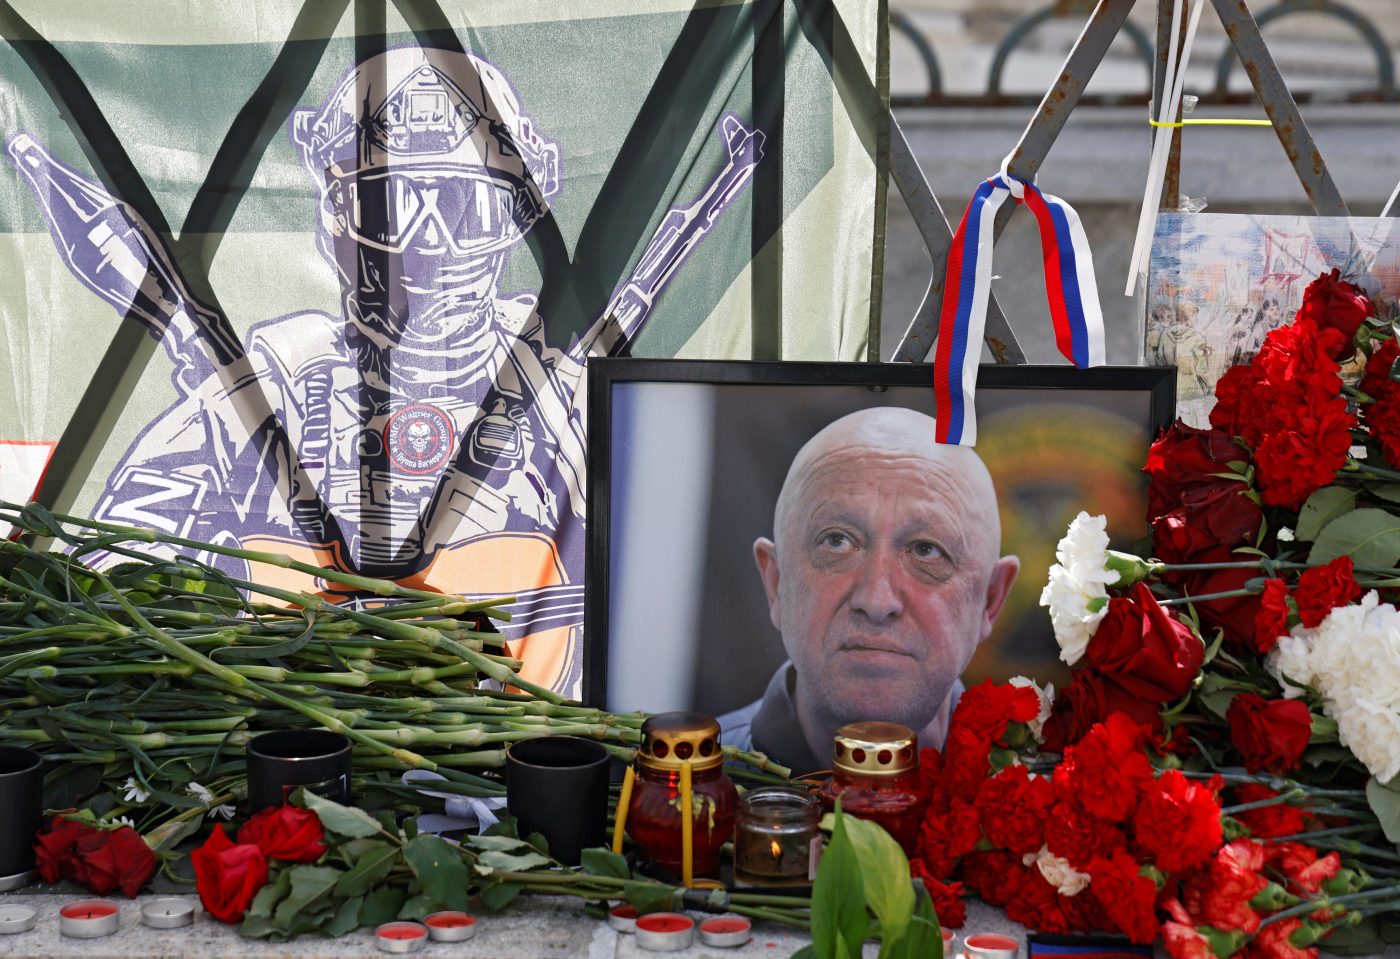 Photo: A view shows a makeshift memorial set up after the presumed death of Yevgeny Prigozhin, head of the Wagner mercenary group, in a plane crash, in Moscow, Russia August 25, 2023. Credit: REUTERS/Maxim Shemetov